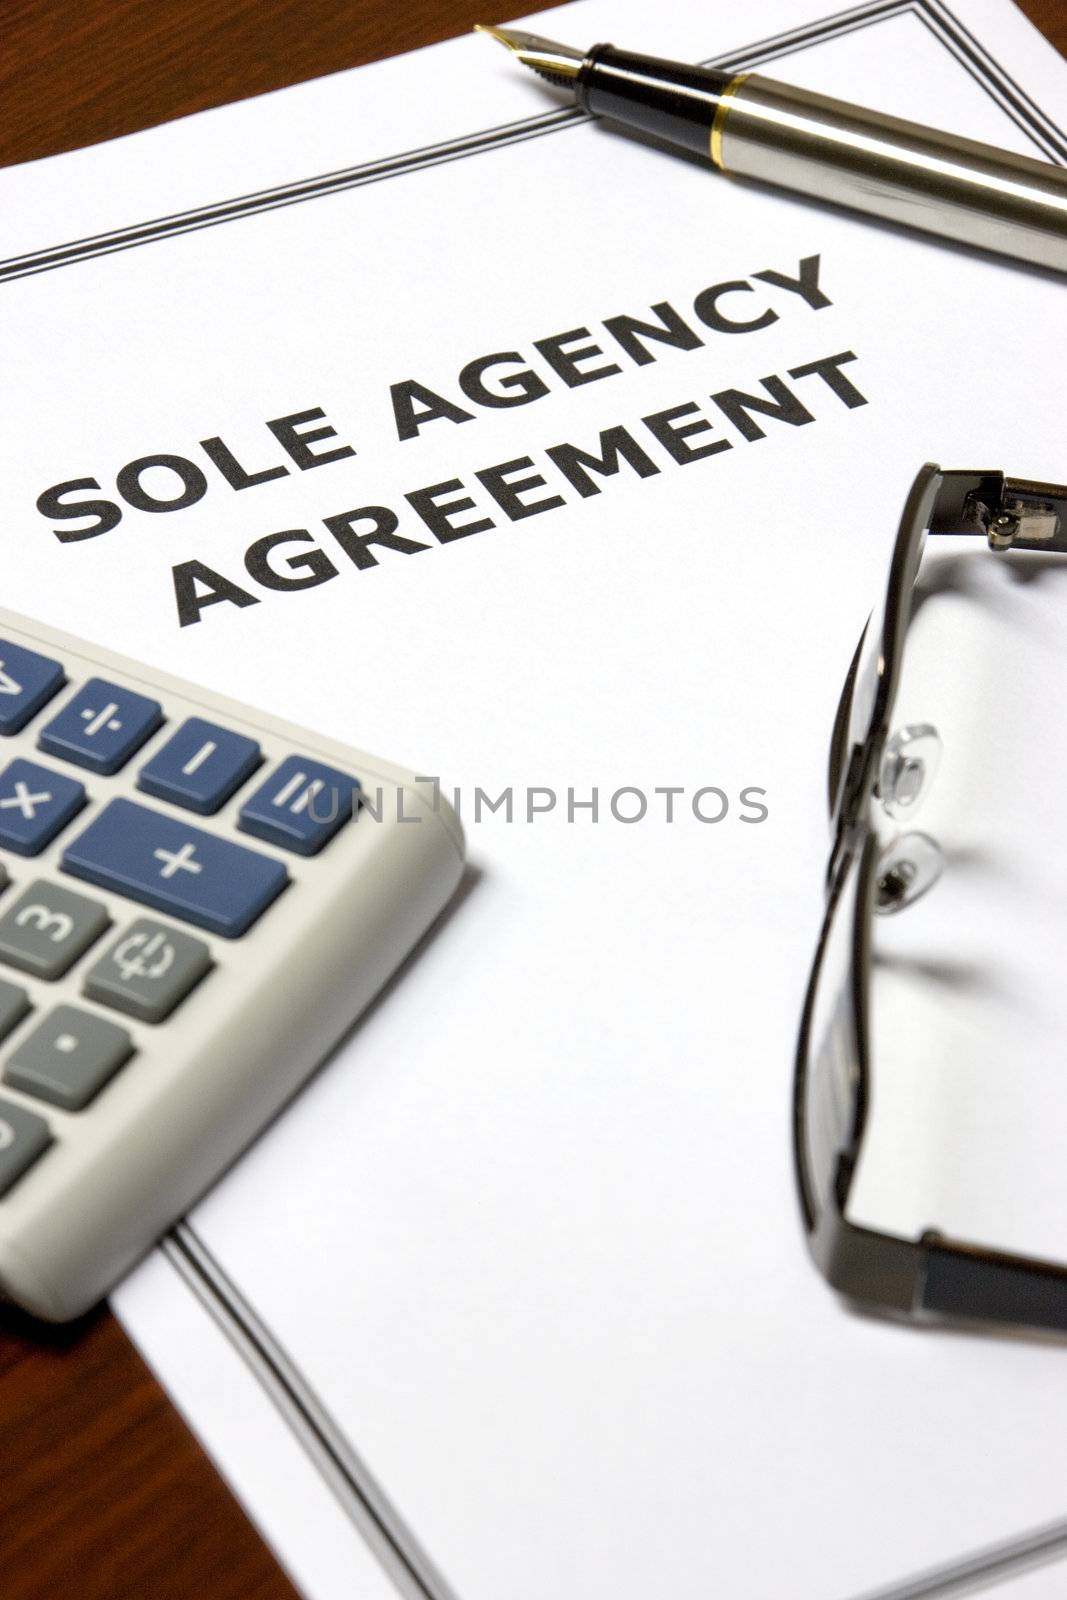 Sole Agency Agreement by shariffc